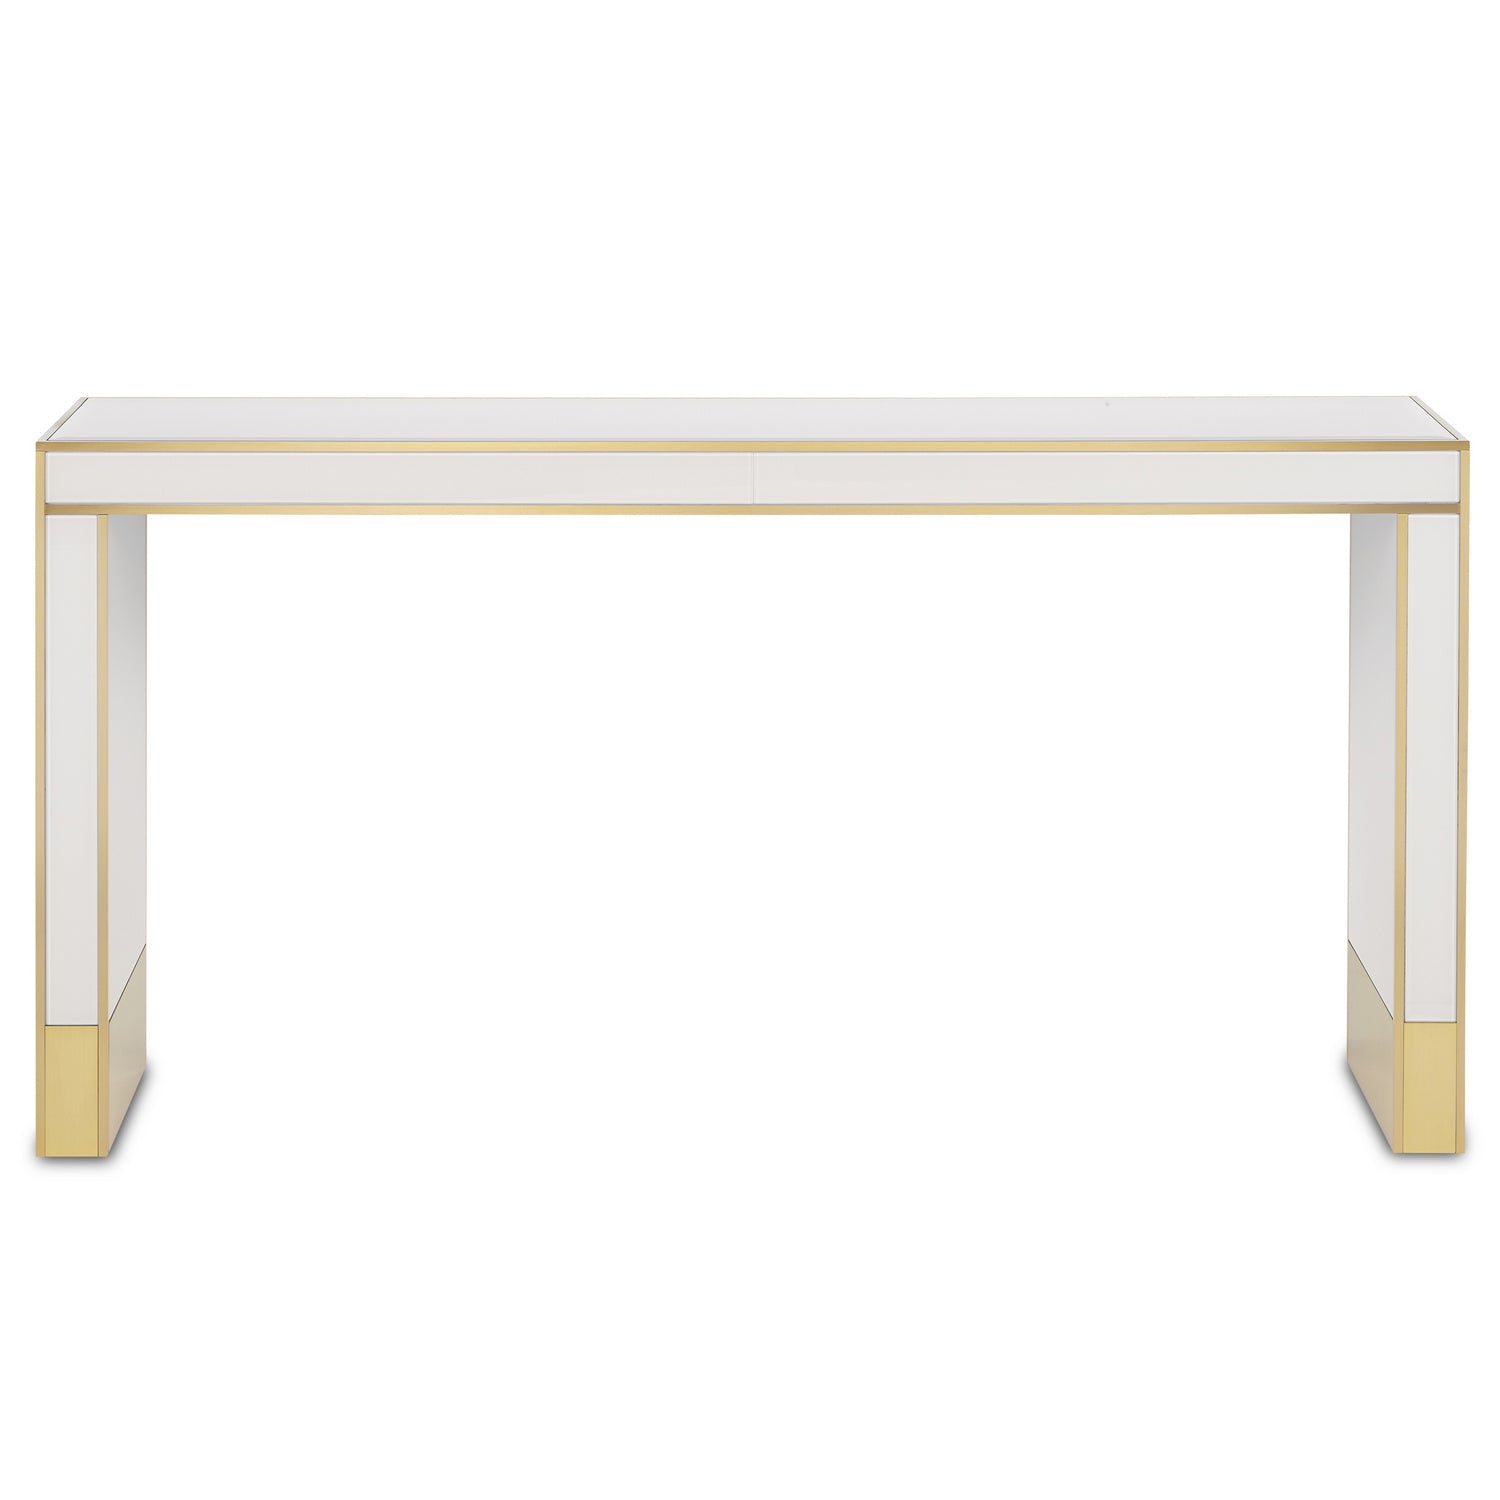 Console Table from the Arden collection in Ivory/Satin Brass finish